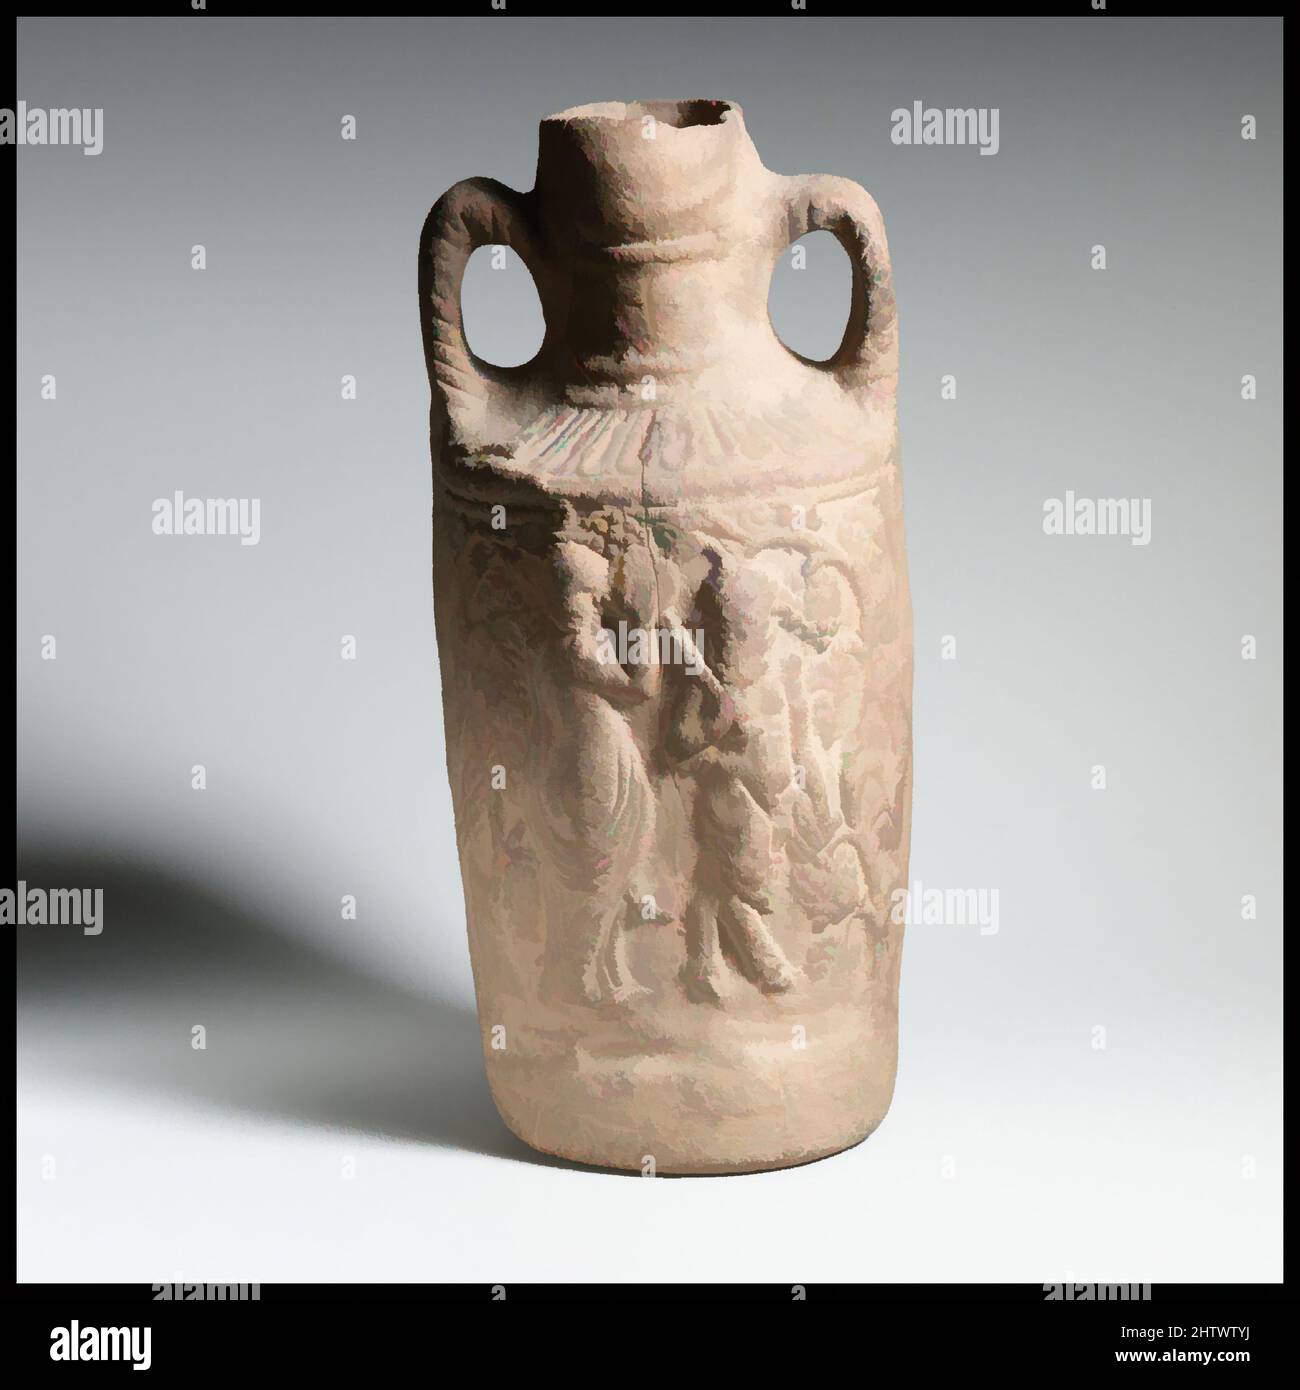 Art inspired by Terracotta amphora (jug), Mid-Imperial, 2nd–3rd century A.D., Roman, Terracotta; Cnidian relief ware, H. 10 3/8 in. (26.4 cm), Vases, This vessel was made at Cnidus, a trading and manufacturing port in Caria (southwestern Turkey), famed for its statue of Aphrodite by, Classic works modernized by Artotop with a splash of modernity. Shapes, color and value, eye-catching visual impact on art. Emotions through freedom of artworks in a contemporary way. A timeless message pursuing a wildly creative new direction. Artists turning to the digital medium and creating the Artotop NFT Stock Photo